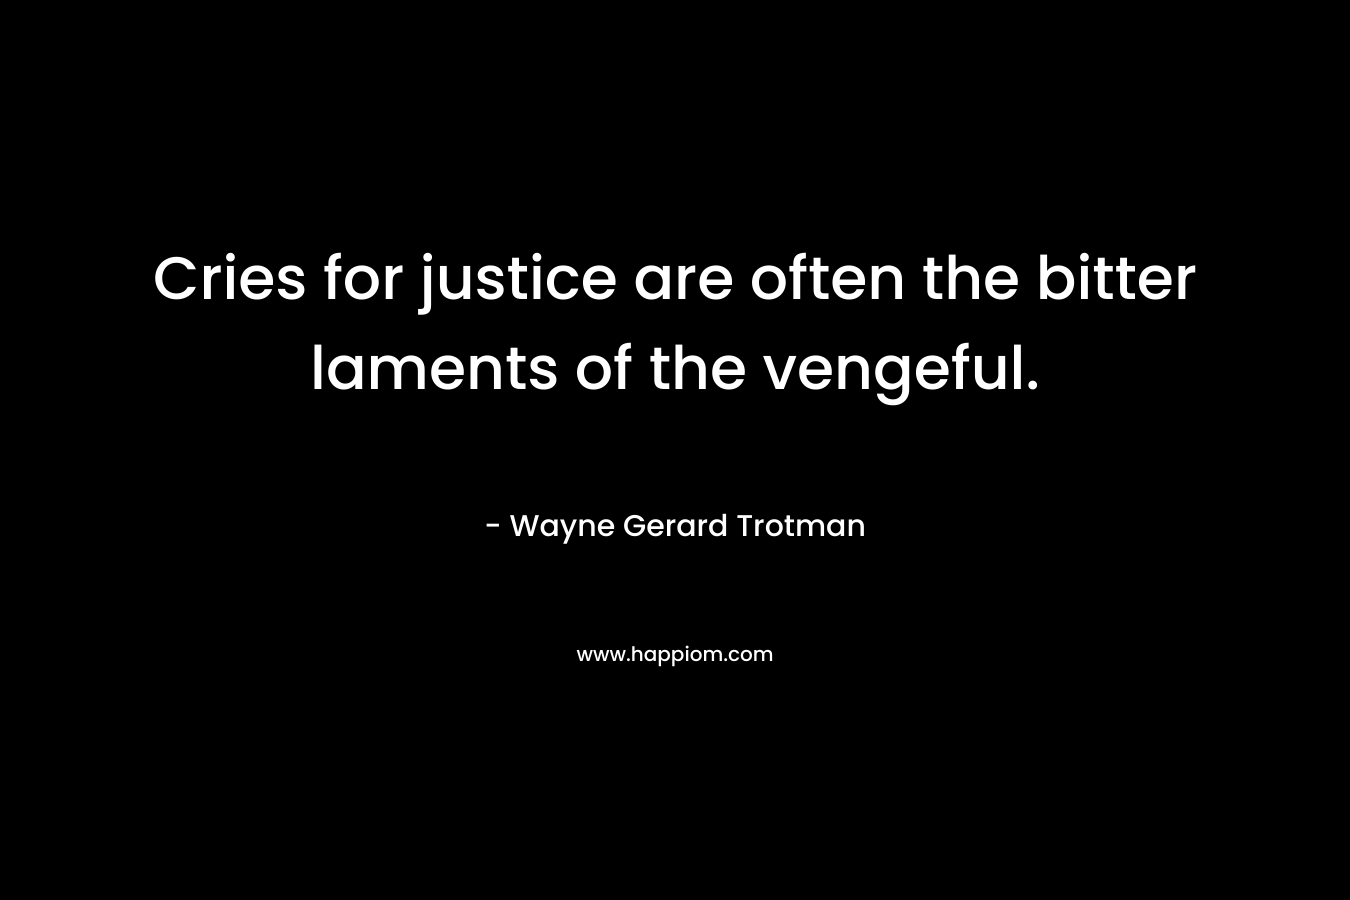 Cries for justice are often the bitter laments of the vengeful. – Wayne Gerard Trotman